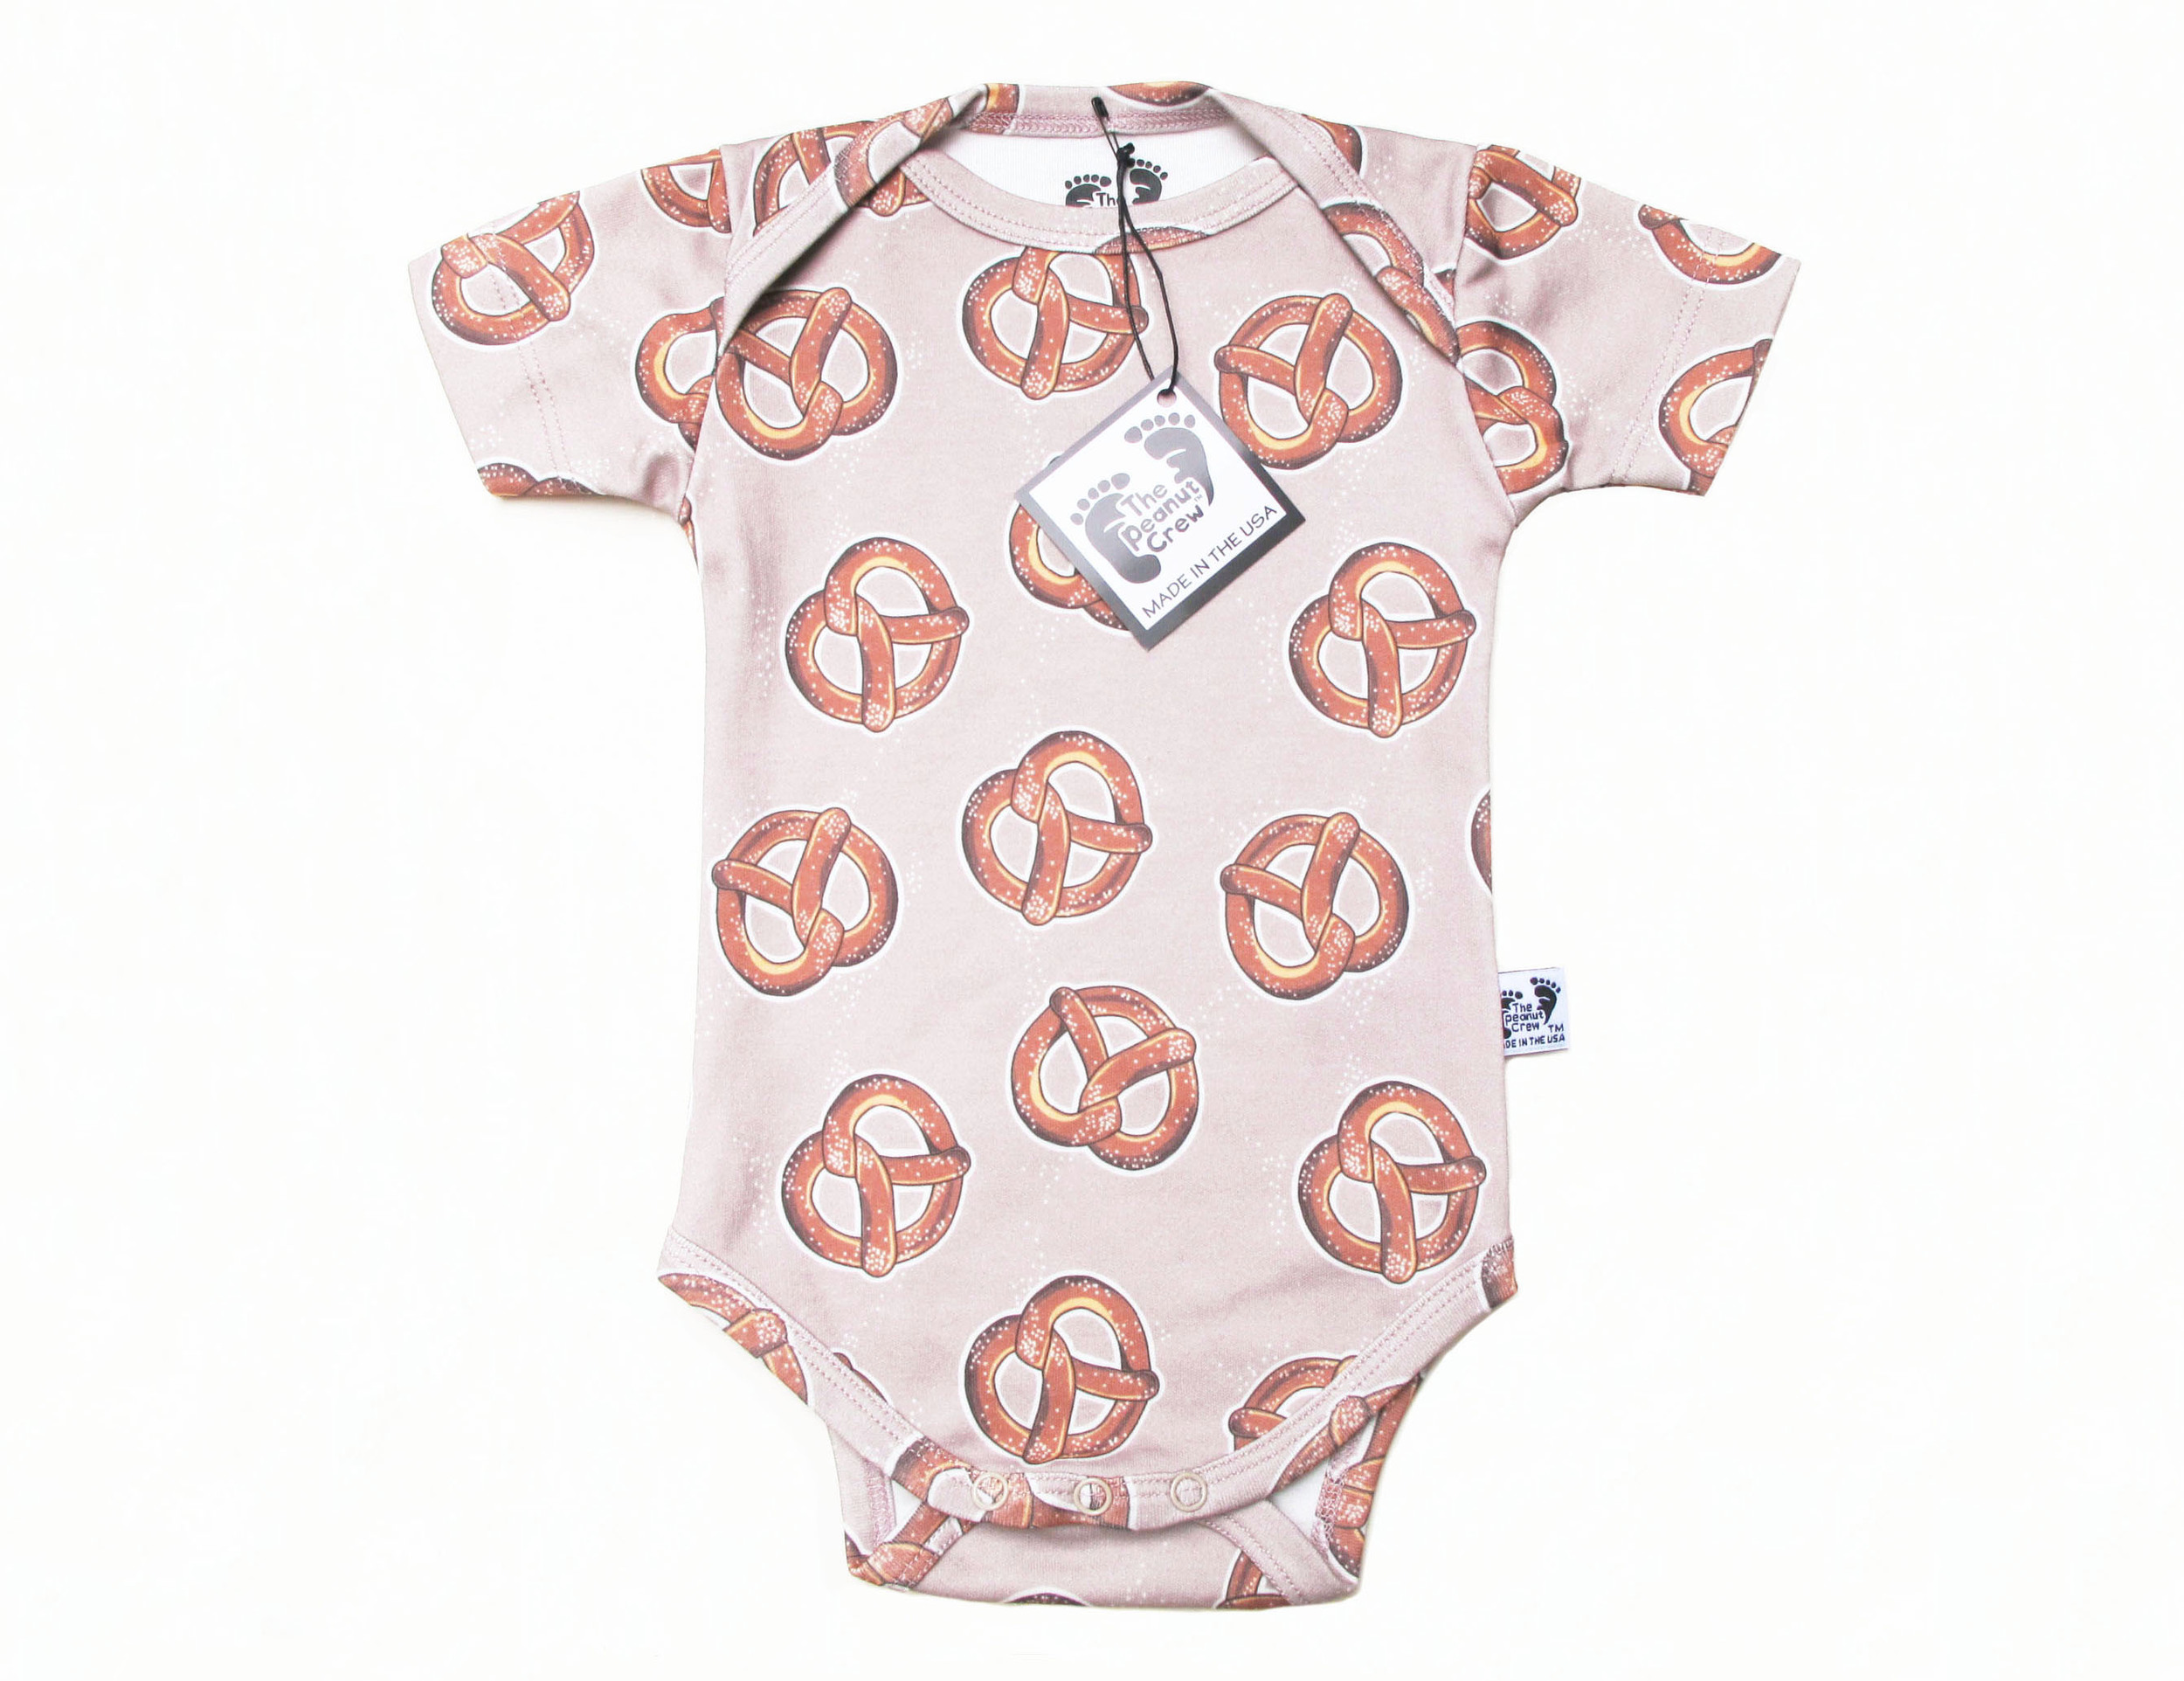 Nypd Infant Bodysuit White with Navy Chest Print 